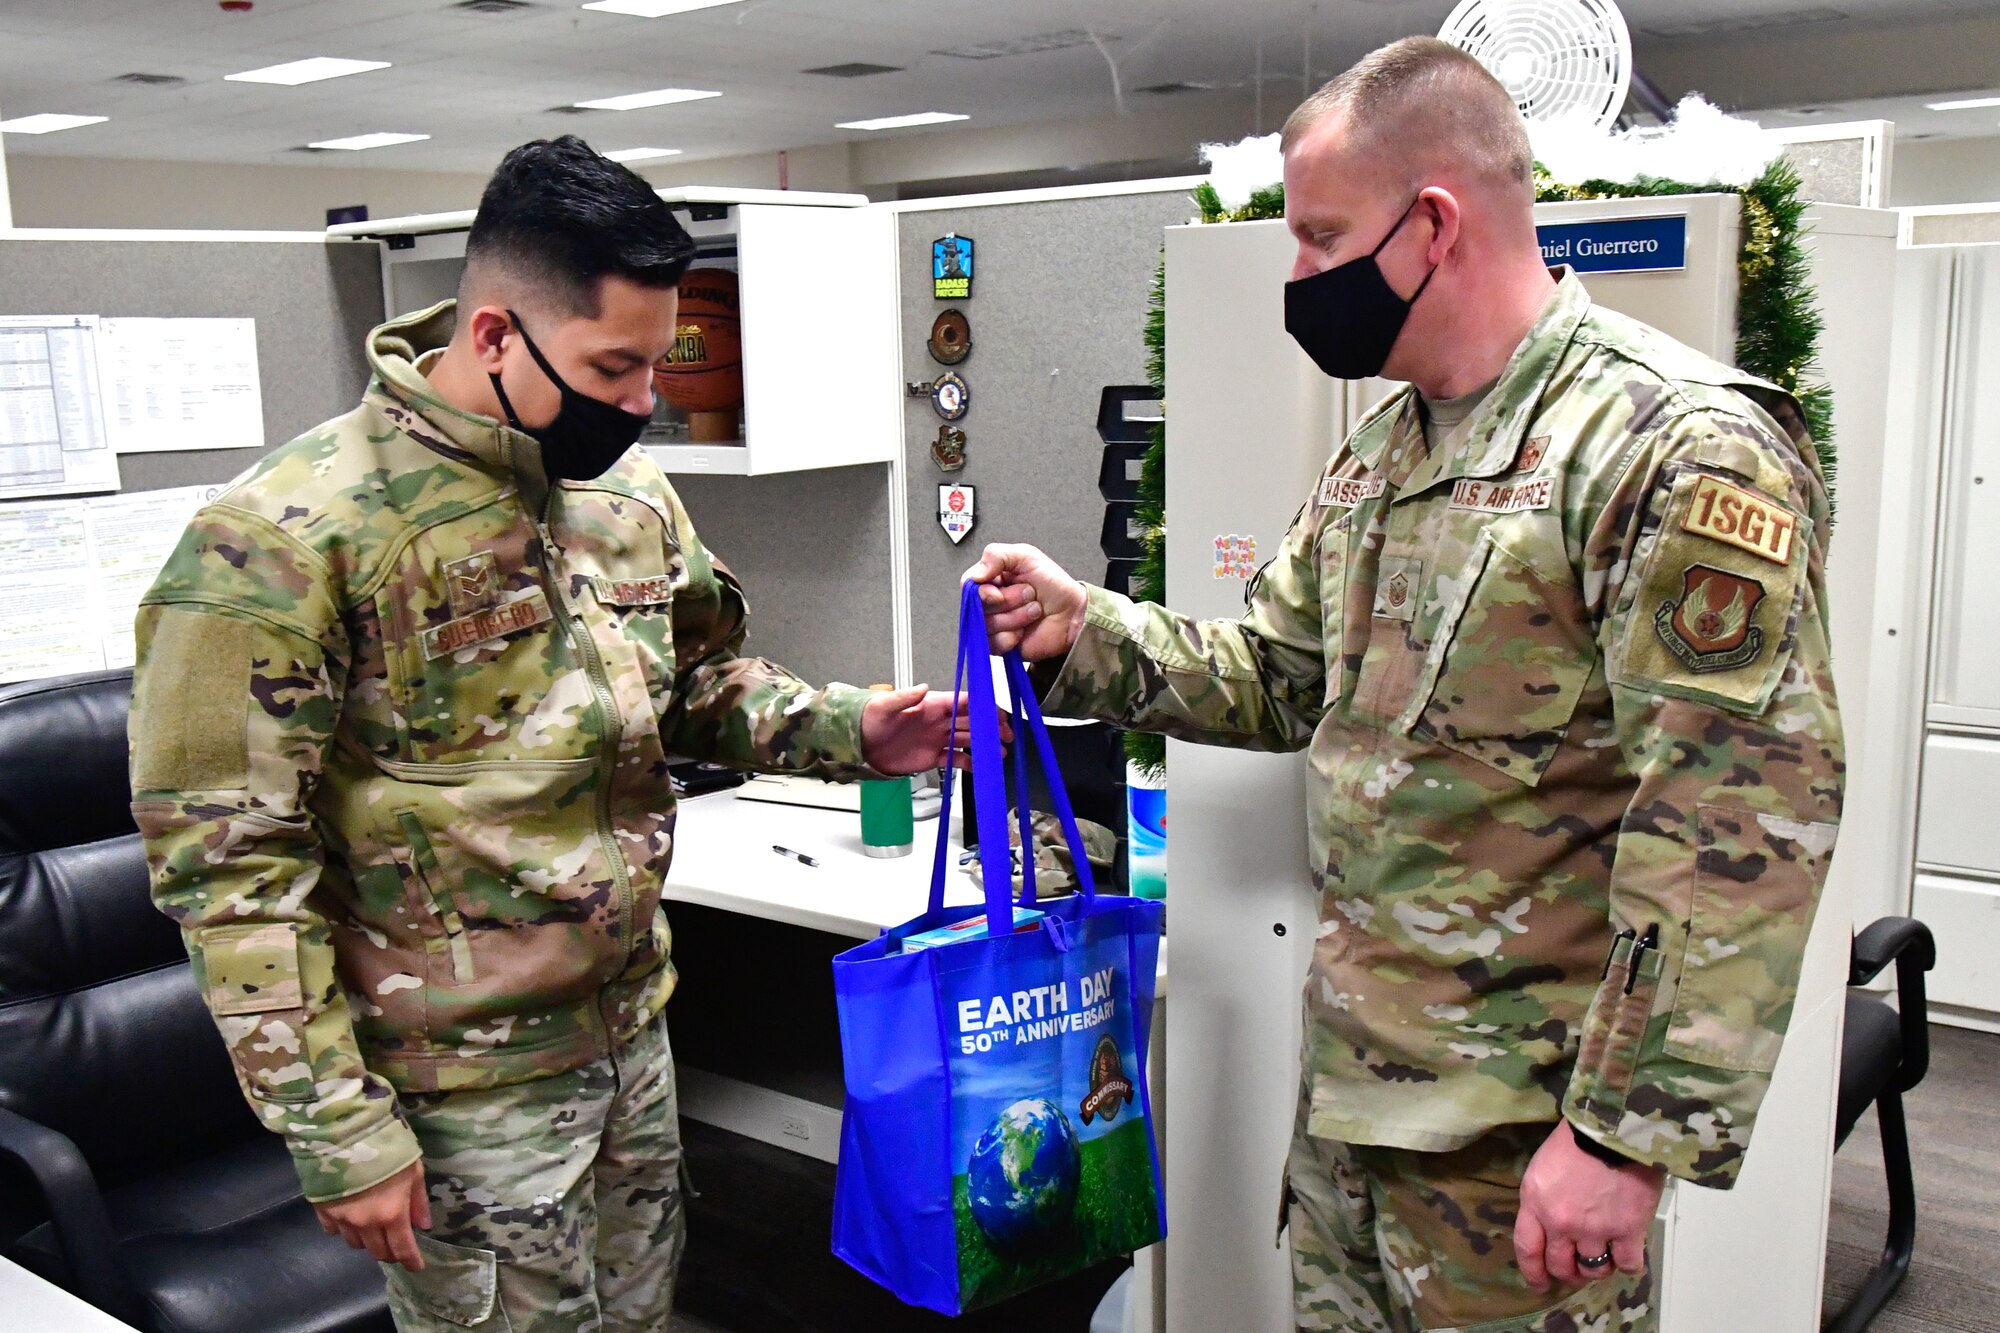 Senior Airman Amiel Guerrero, 75th Force Support Squadron, receives a Thanksgiving meal kit from Master Sgt. Randy Hassenplug, 75th Force Support Squadron first sergeant.